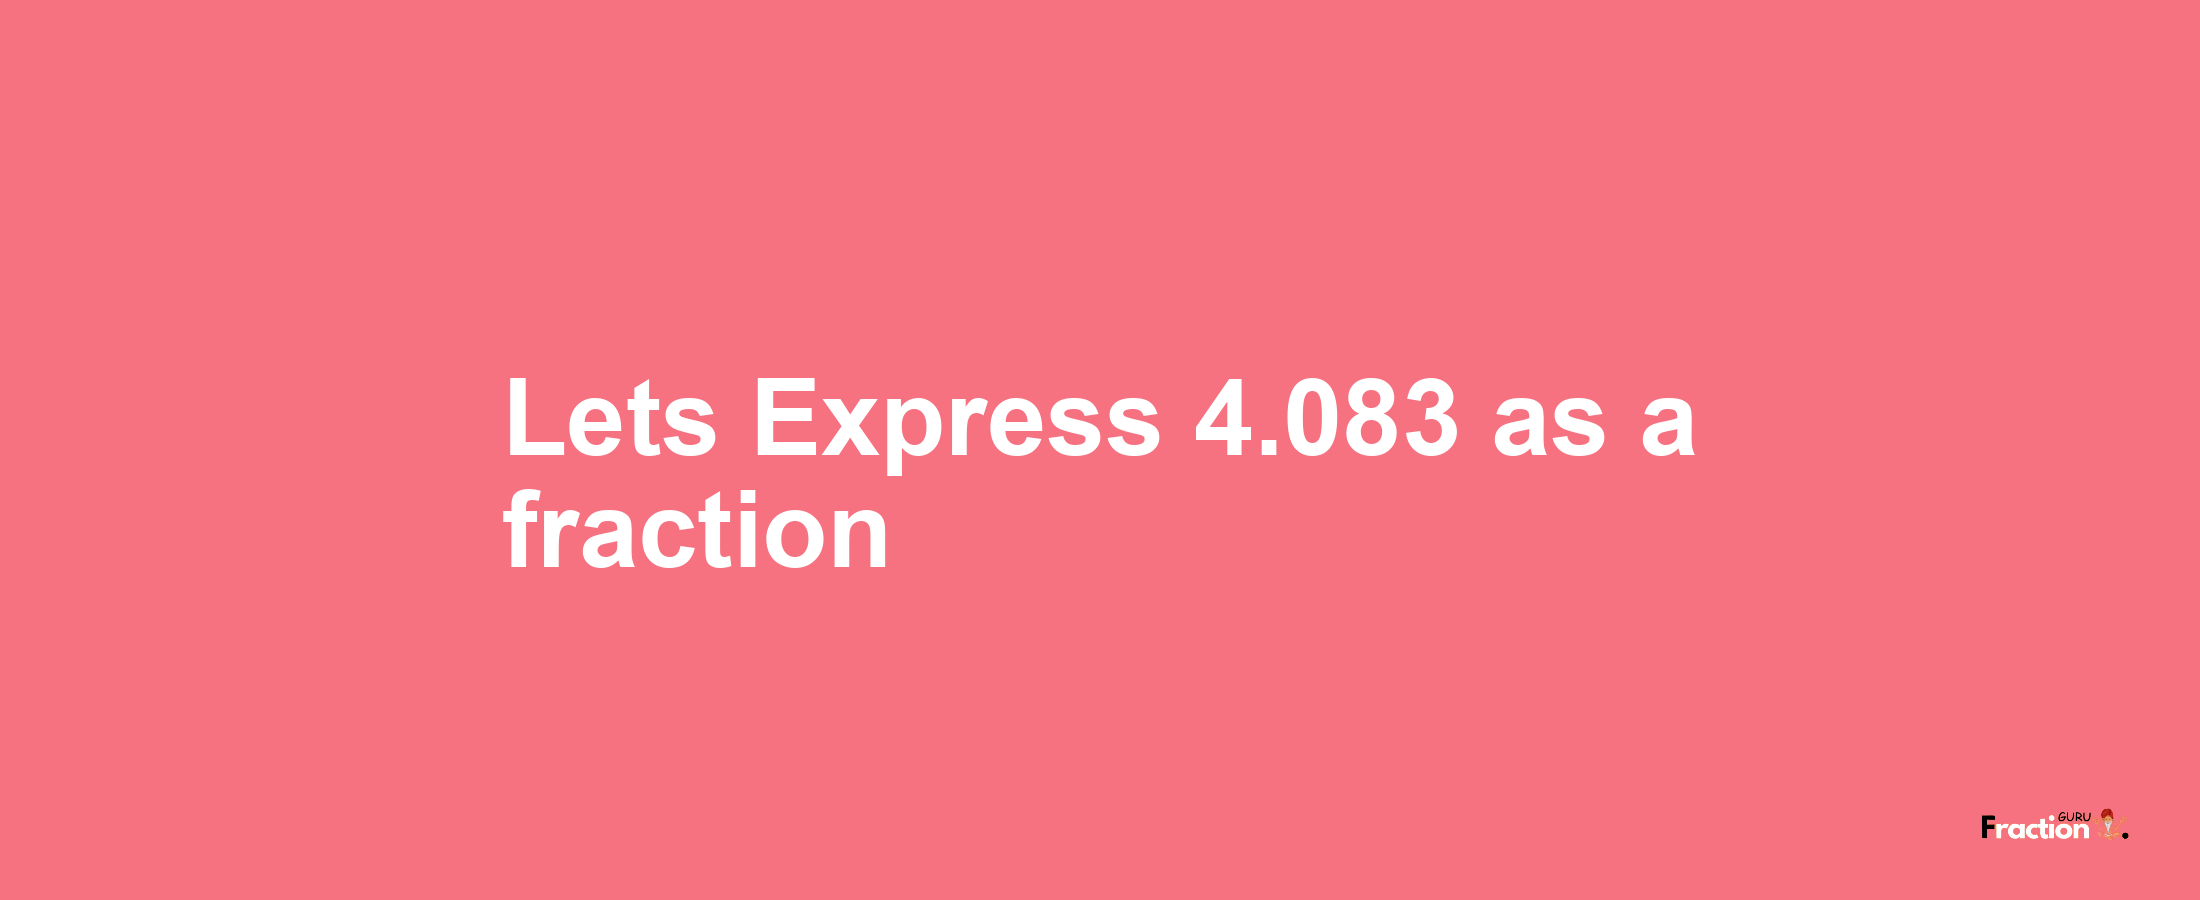 Lets Express 4.083 as afraction